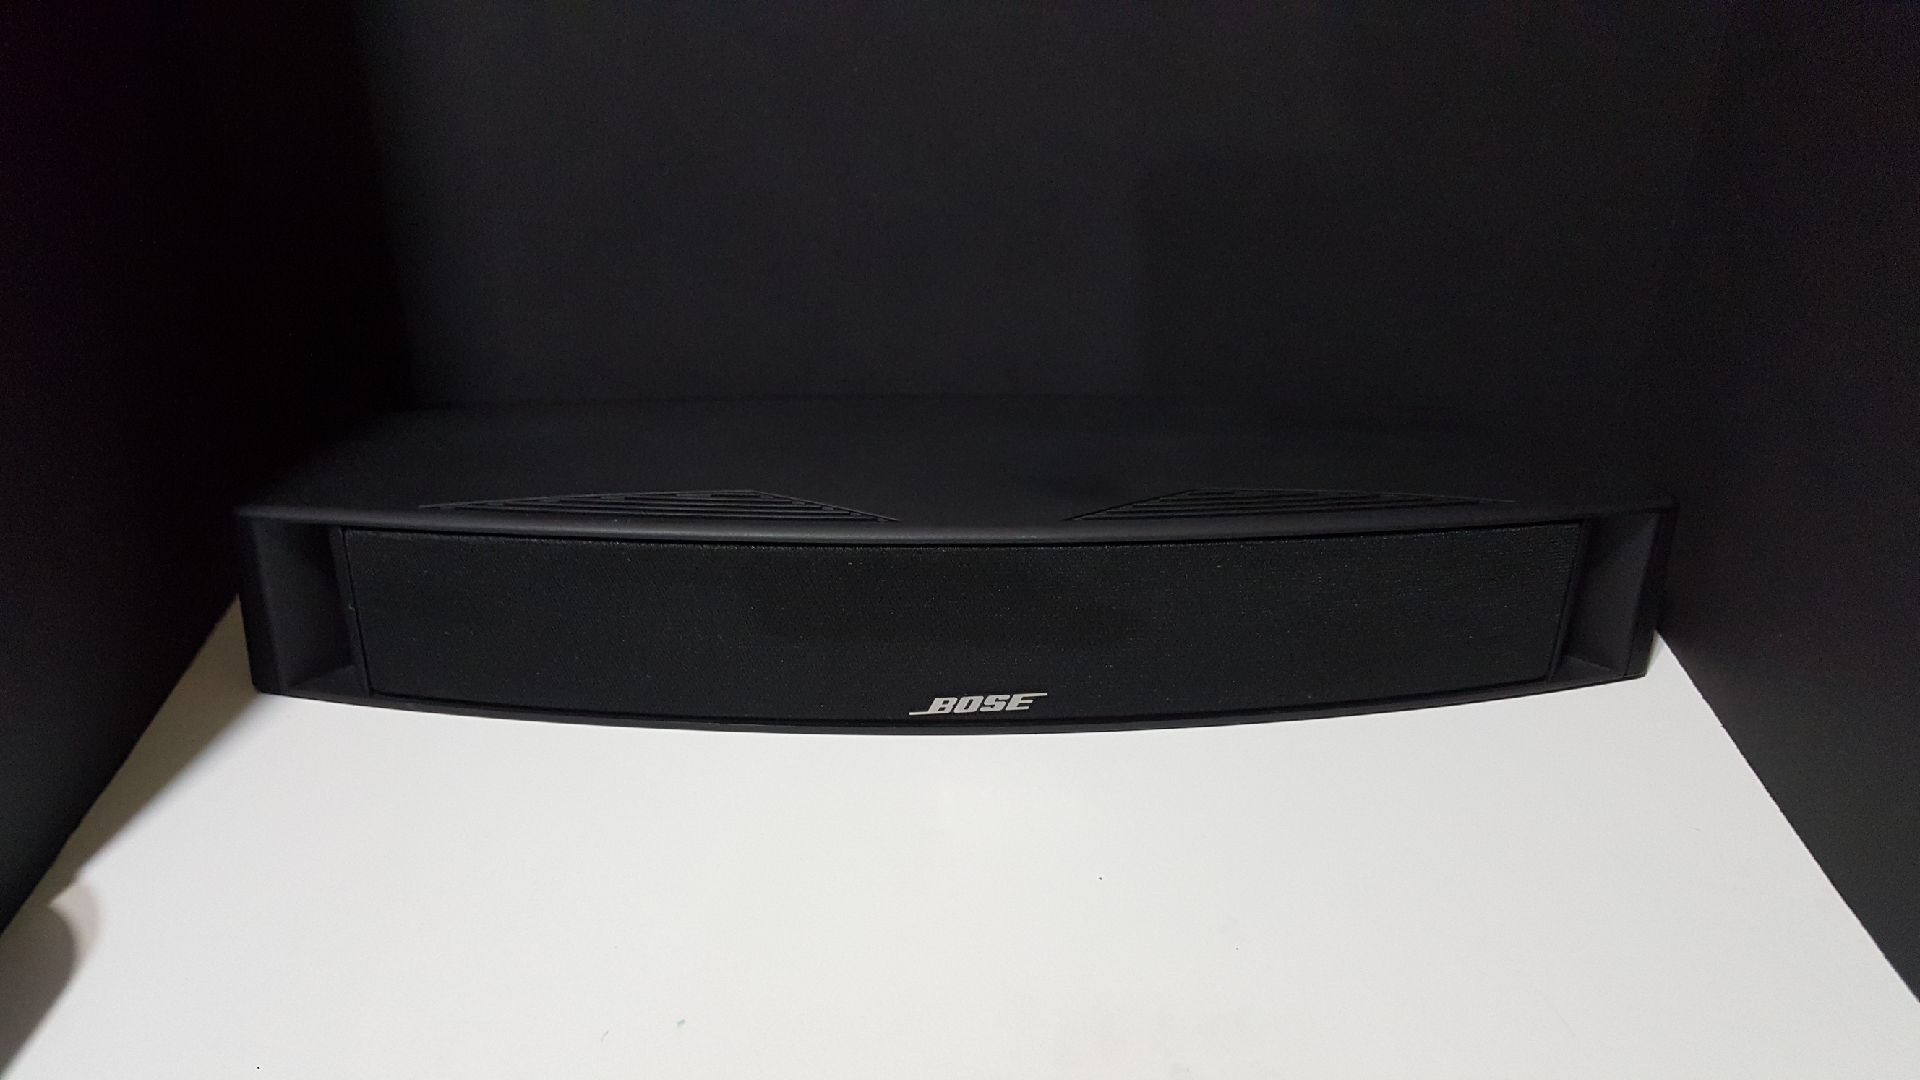 Bose VCS-10 Center Chanel Speaker Home Theater Acoustimas/Lifestyle 18,28,38,48